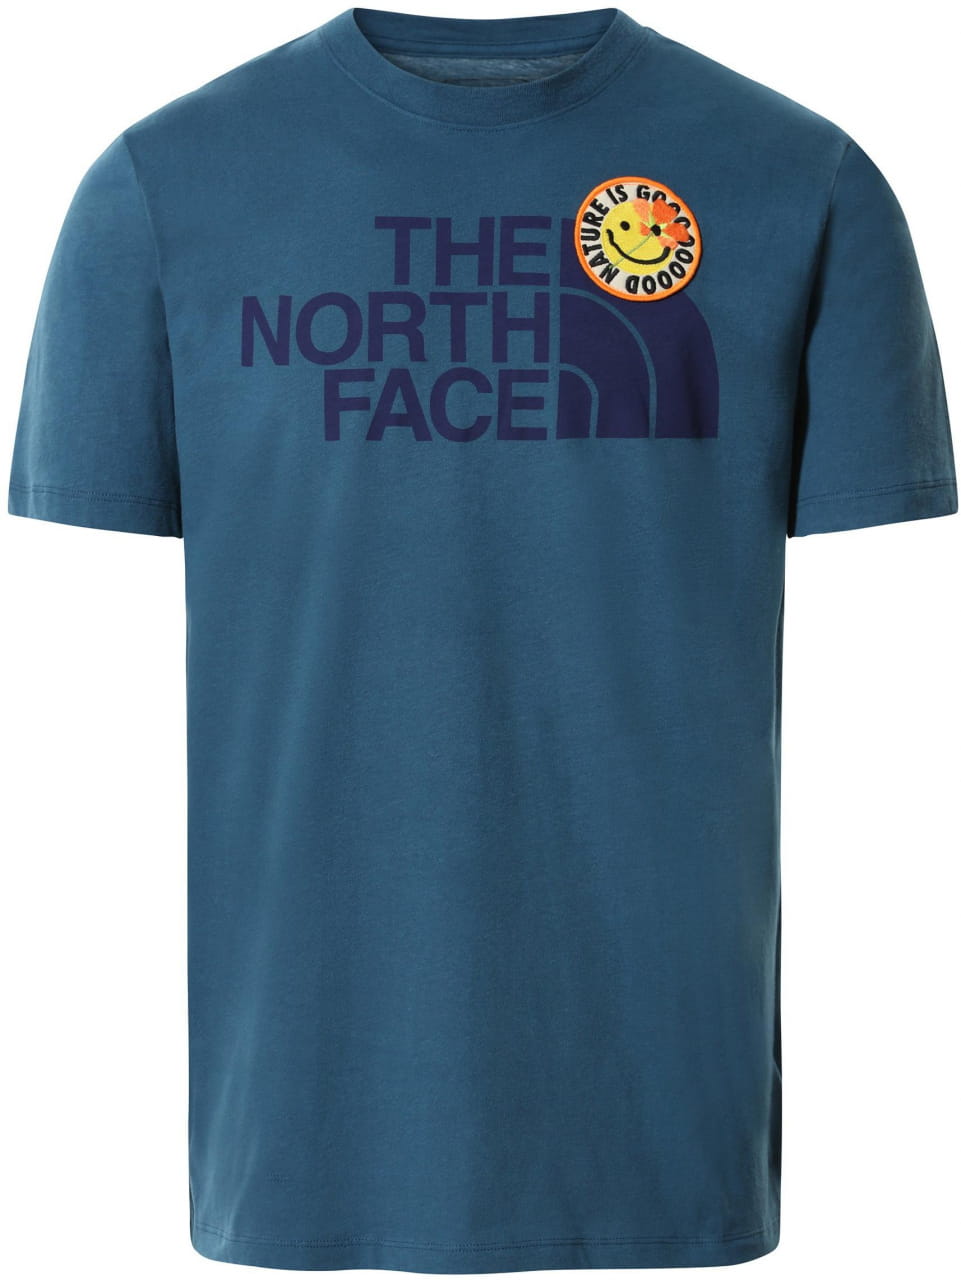 T-Shirts The North Face Men’s S/S Patches Tee